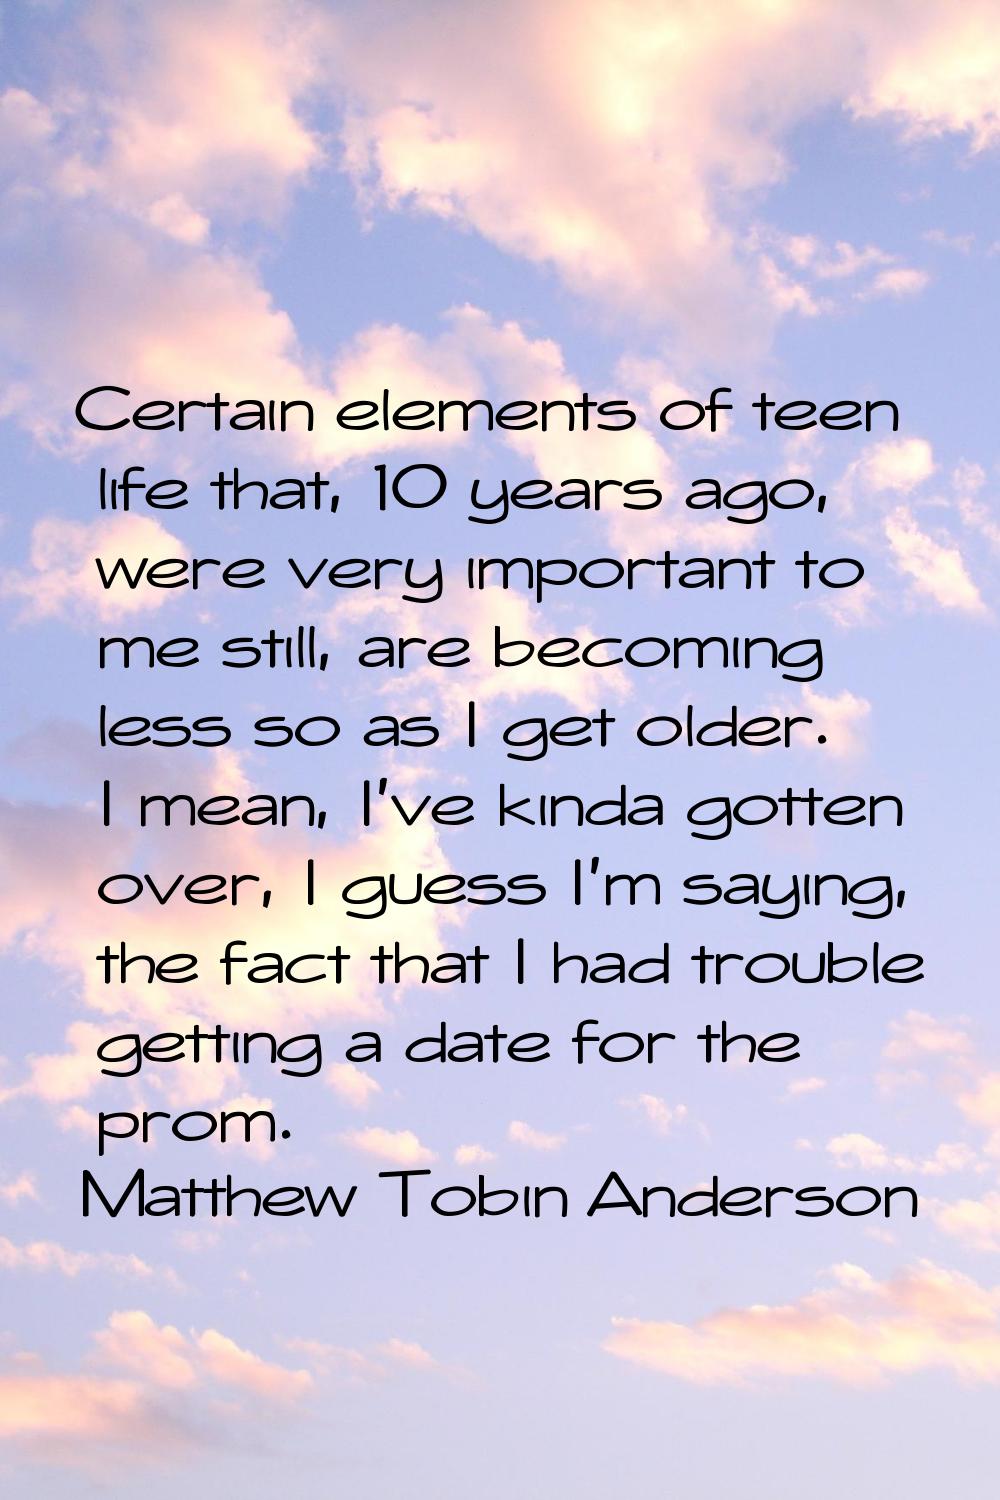 Certain elements of teen life that, 10 years ago, were very important to me still, are becoming les